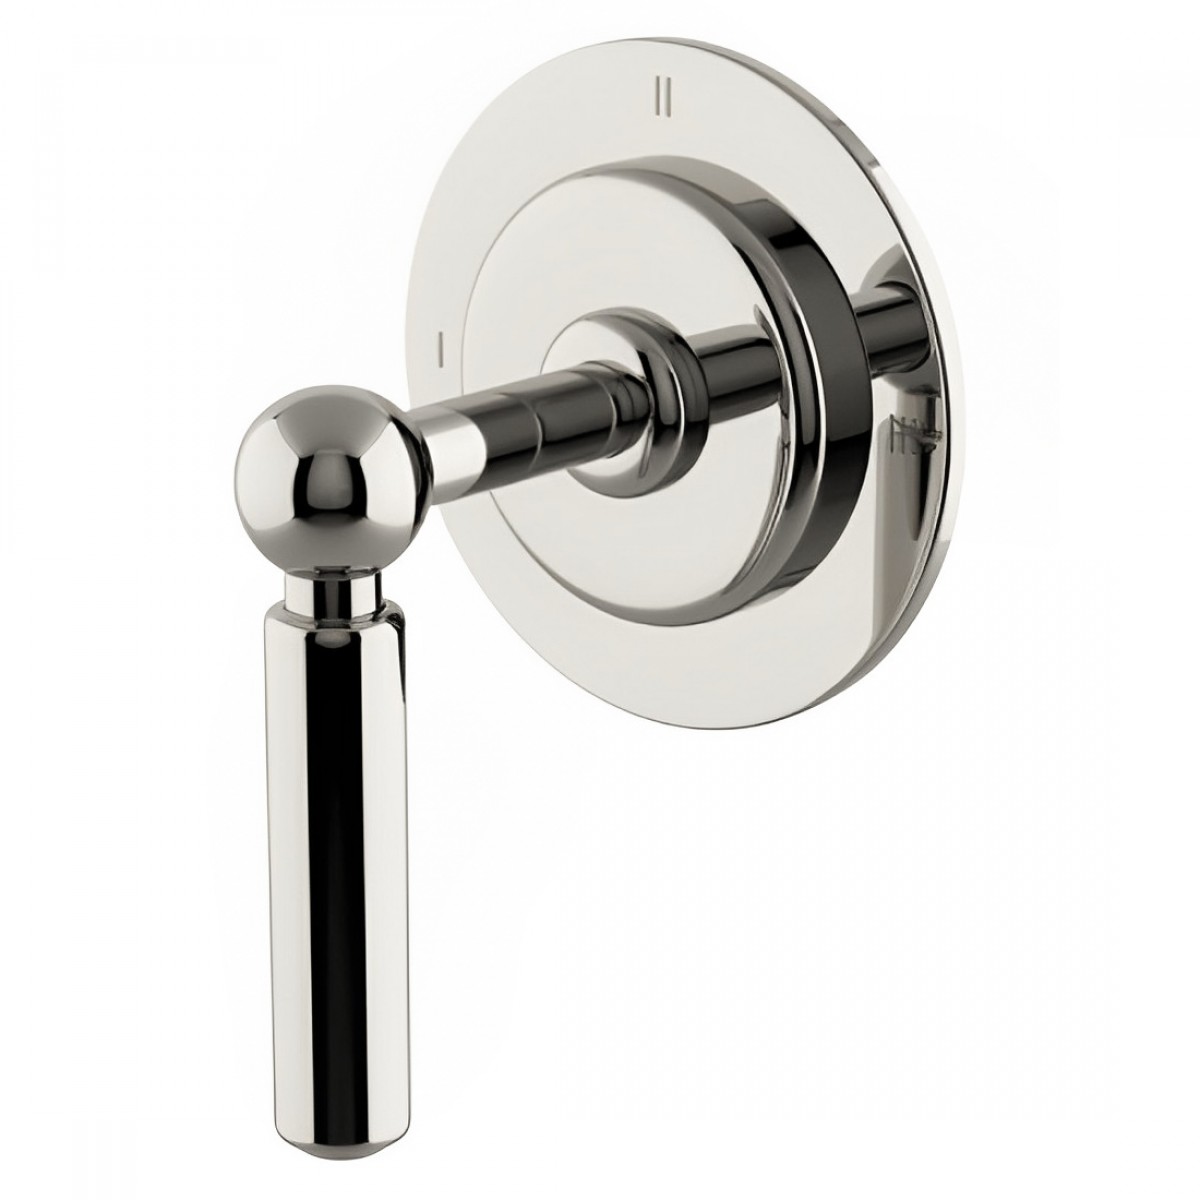 Ludlow Three Way Diverter Valve Trim for Pressure Balance with Roman Numerals and Lever Handle